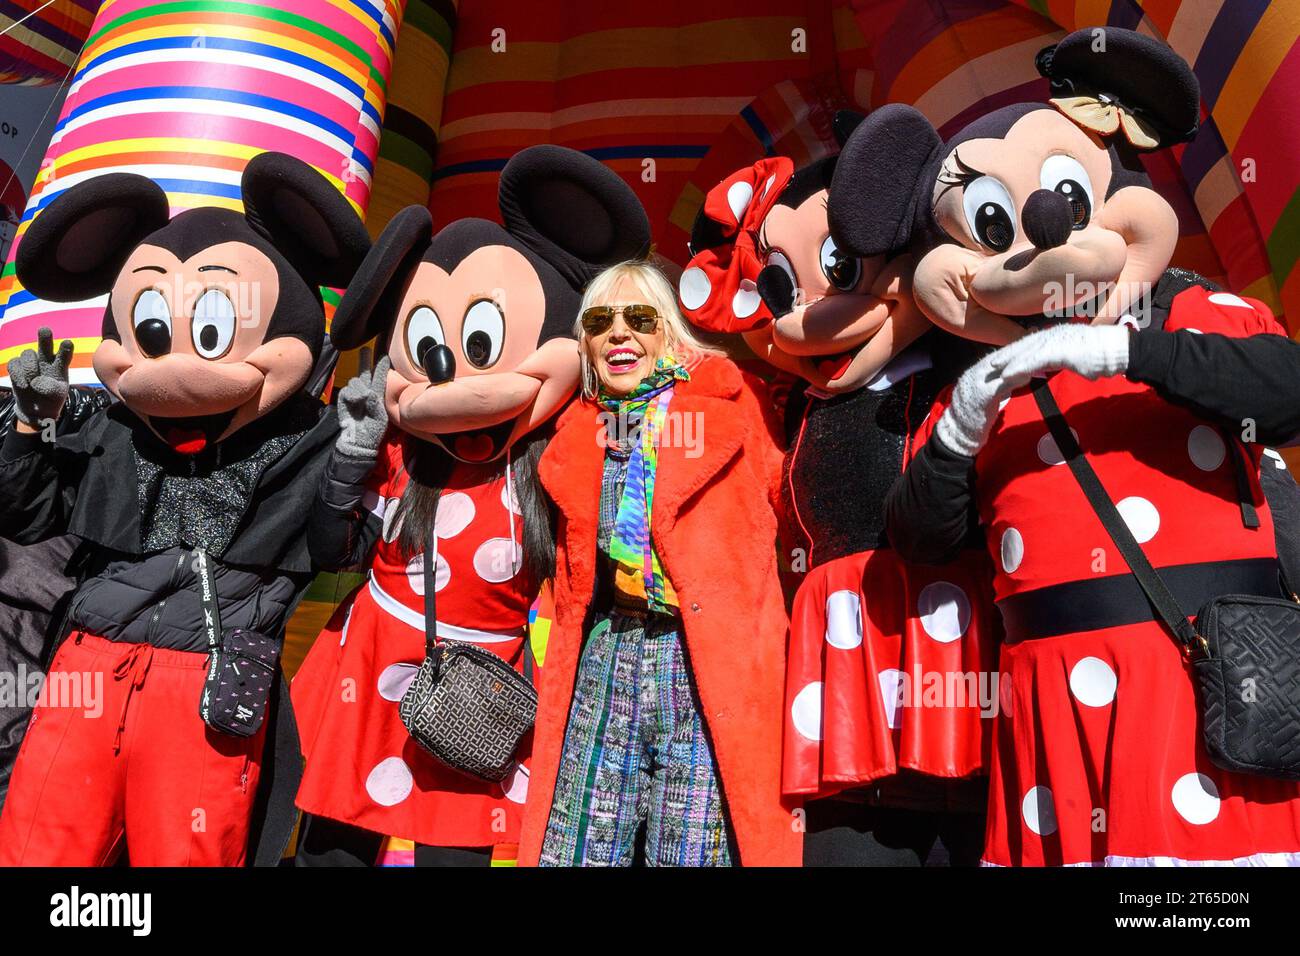 New York, USA. , . Argentinian conceptual pop artist Marta Minujín, 80, poses next to her 'Sculpture of Dreams' installation in Times Square along with characters representing Mickey and Minnie Mouse. The vibrant, large-scale, 16-piece inflatable in the artist's signature stripes is Minujín's first public sculpture in New York City in her sixty-year career, and is presented to coincide with the Jewish Museum's major survey exhibition of her work, Marta Minujín: Arte! Arte! Arte!, opening on November 17. Credit: Enrique Shore/Alamy Live News Stock Photo